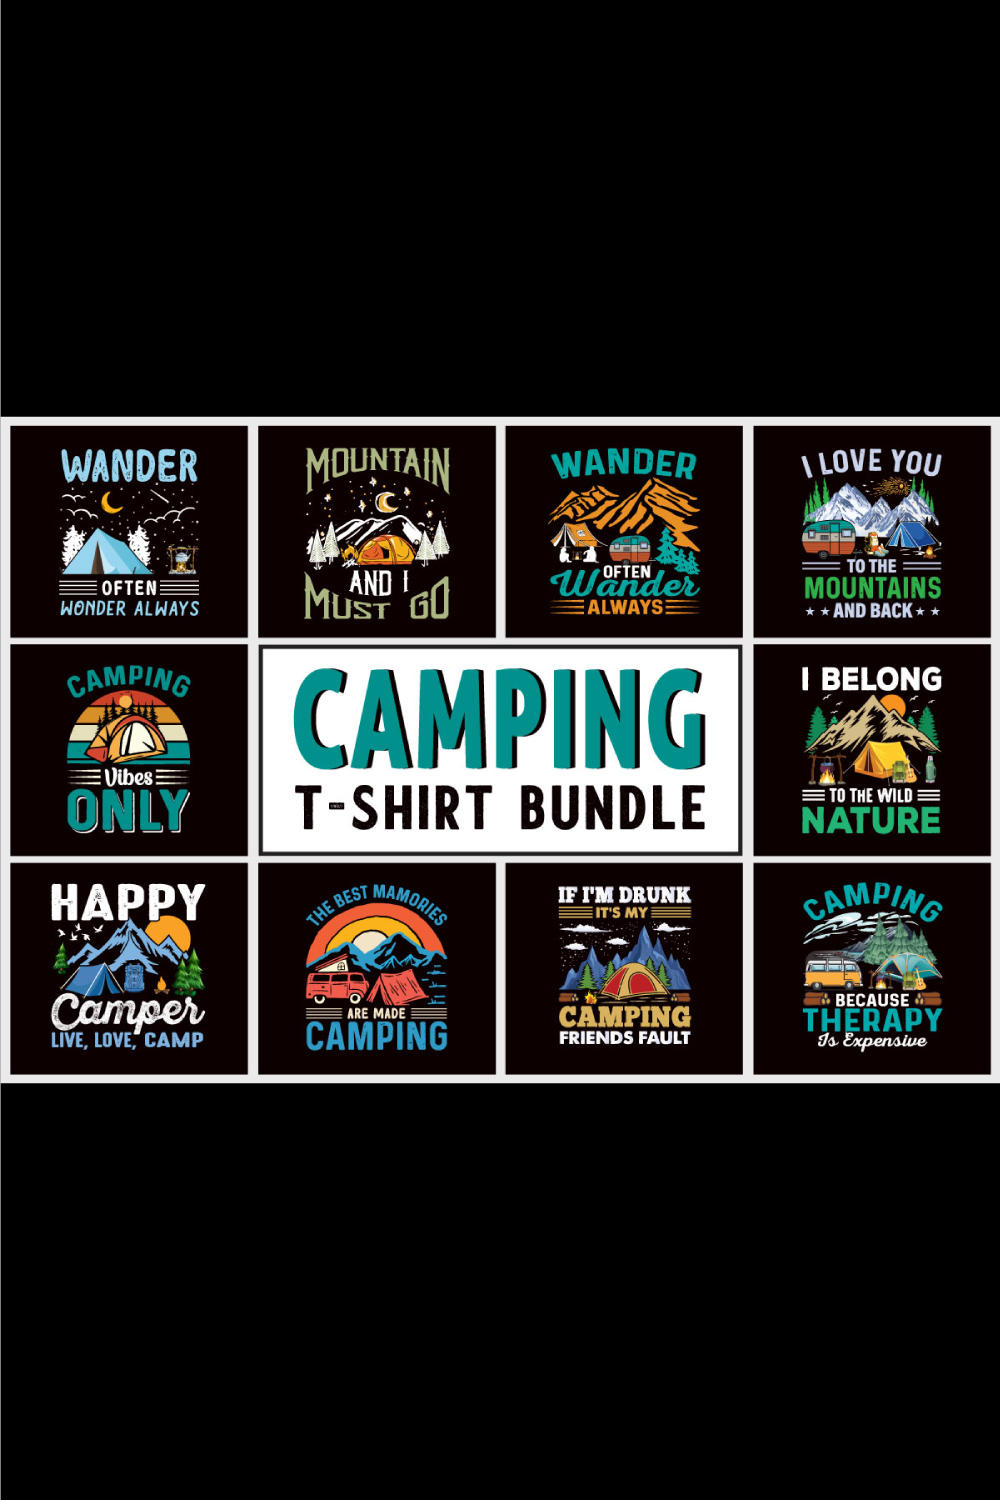 Collection of colorful images on the theme of camping.